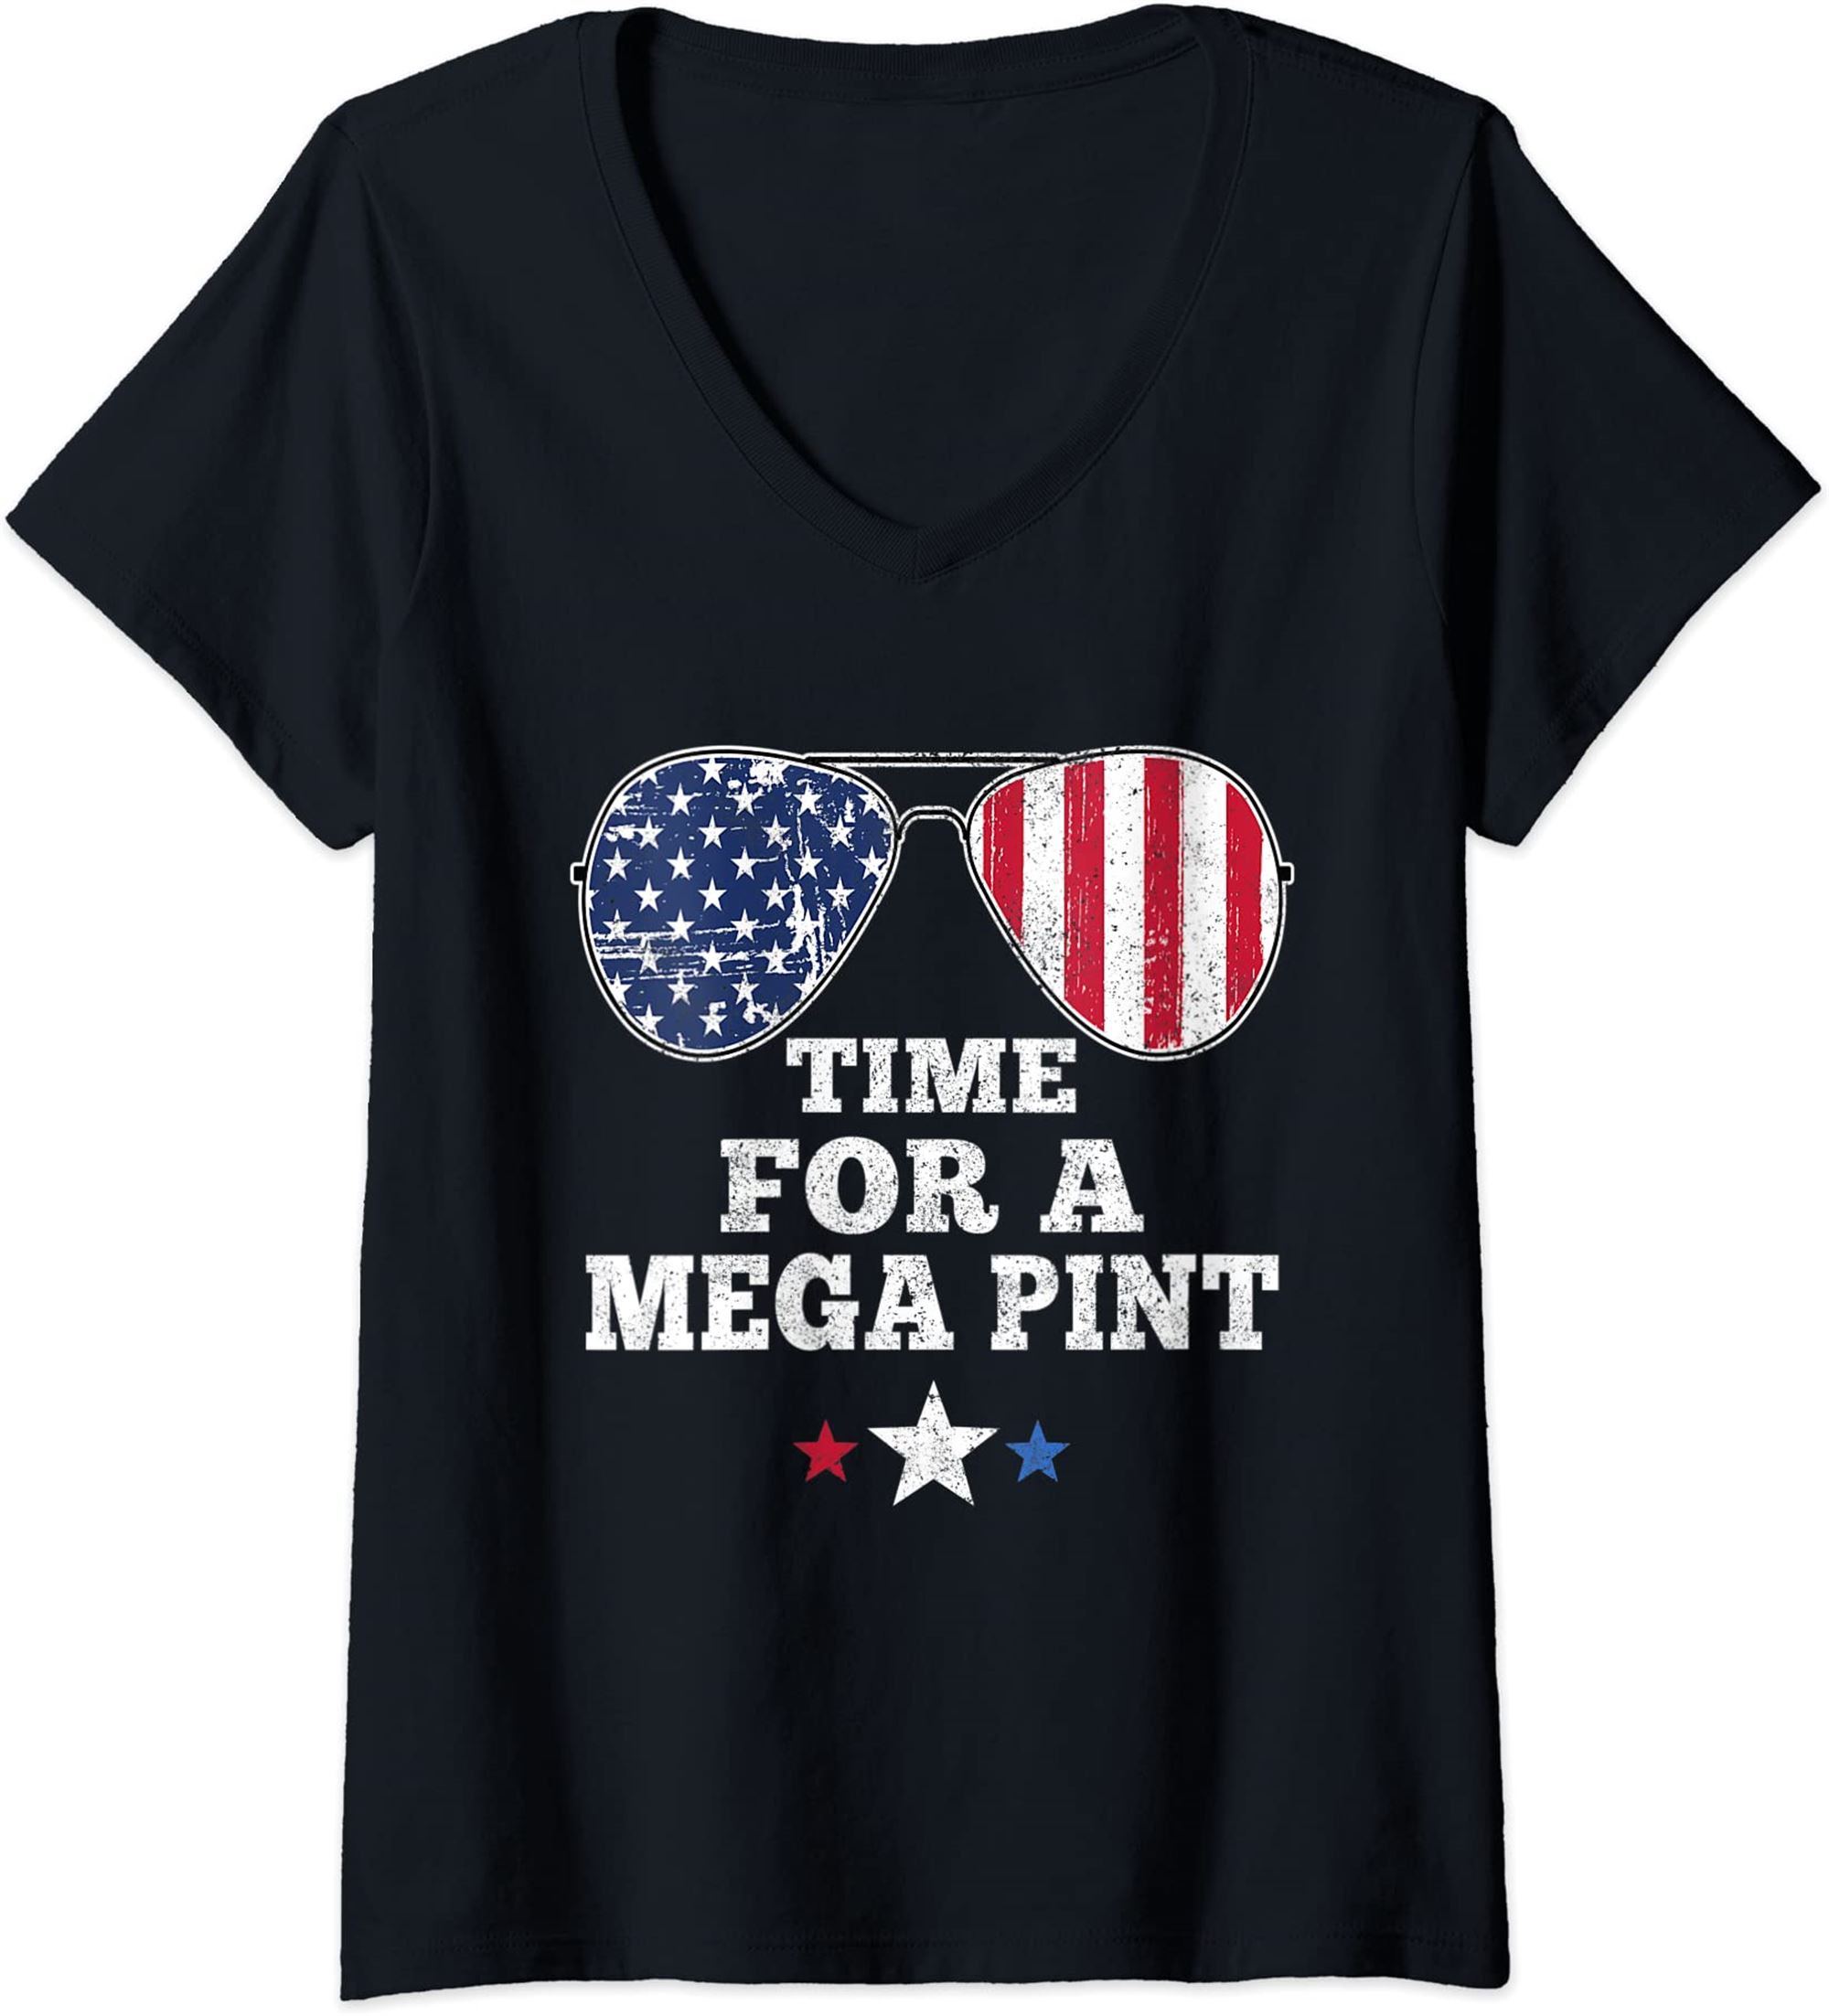 Womens Time For A Mega Pint Funny 4th Of July Patriotic Sunglasses V Neck Tshirt Plus Size Up To 5xl